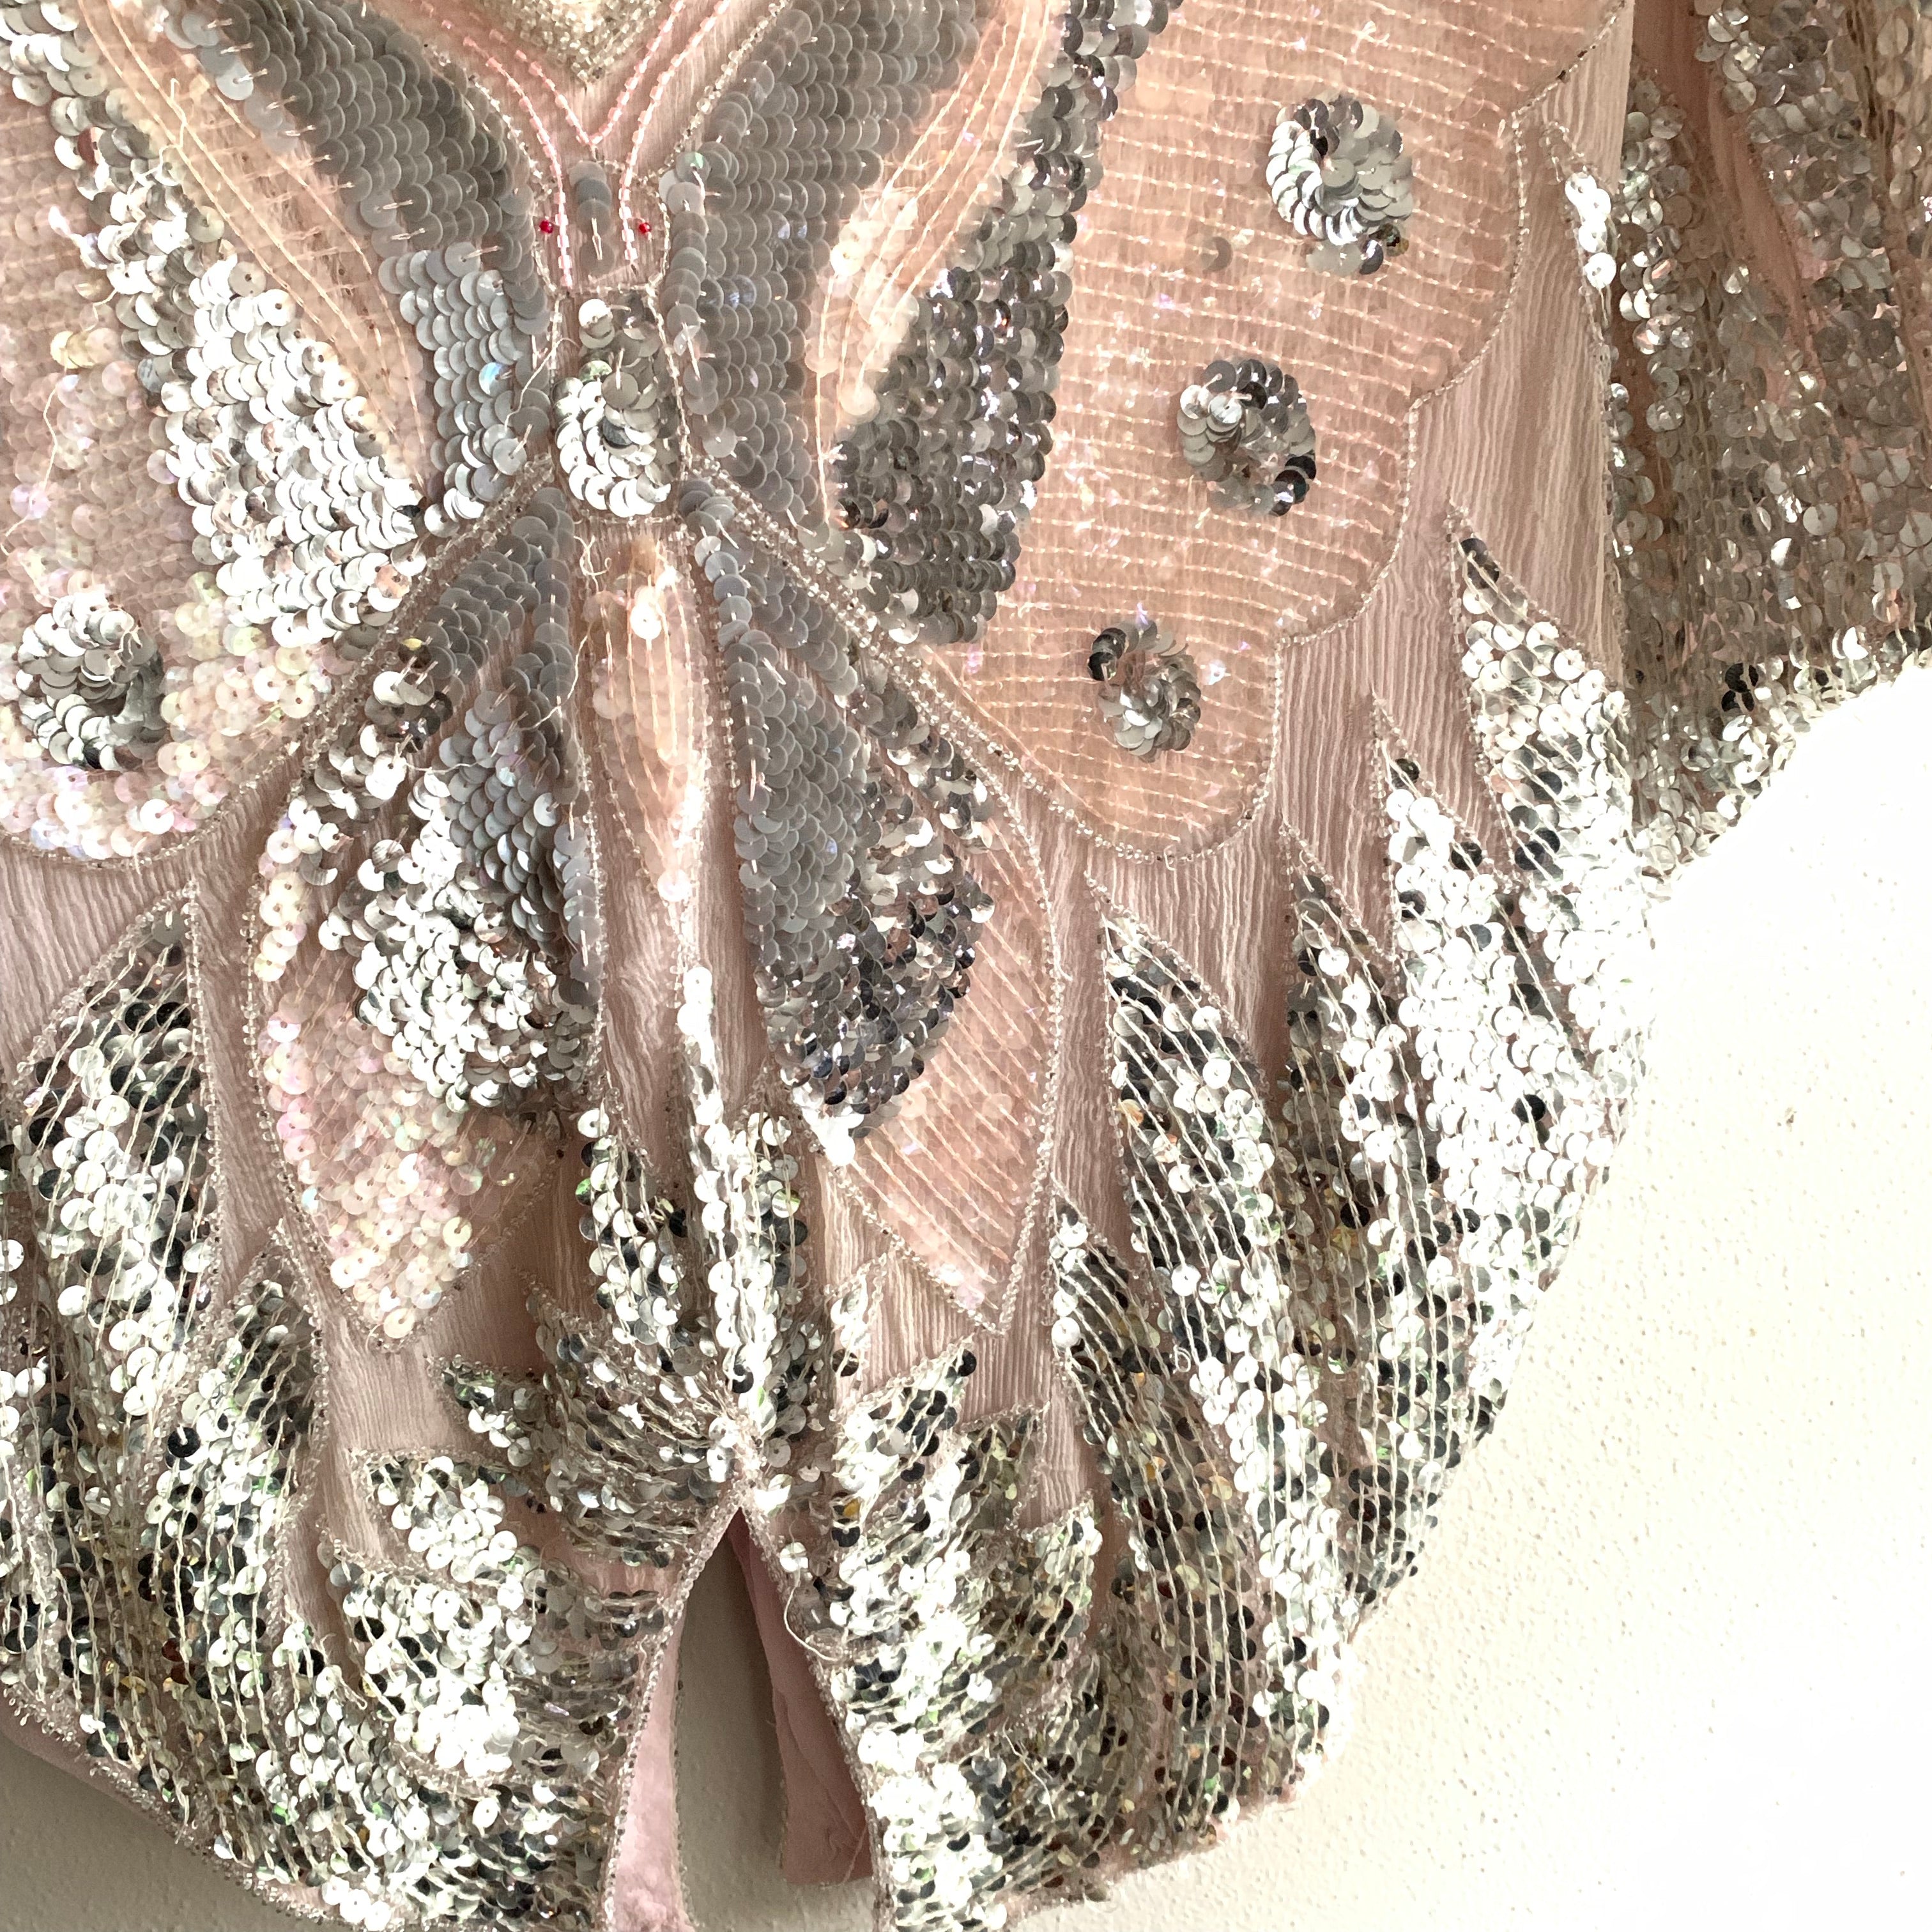 Sequin Butterfly Top